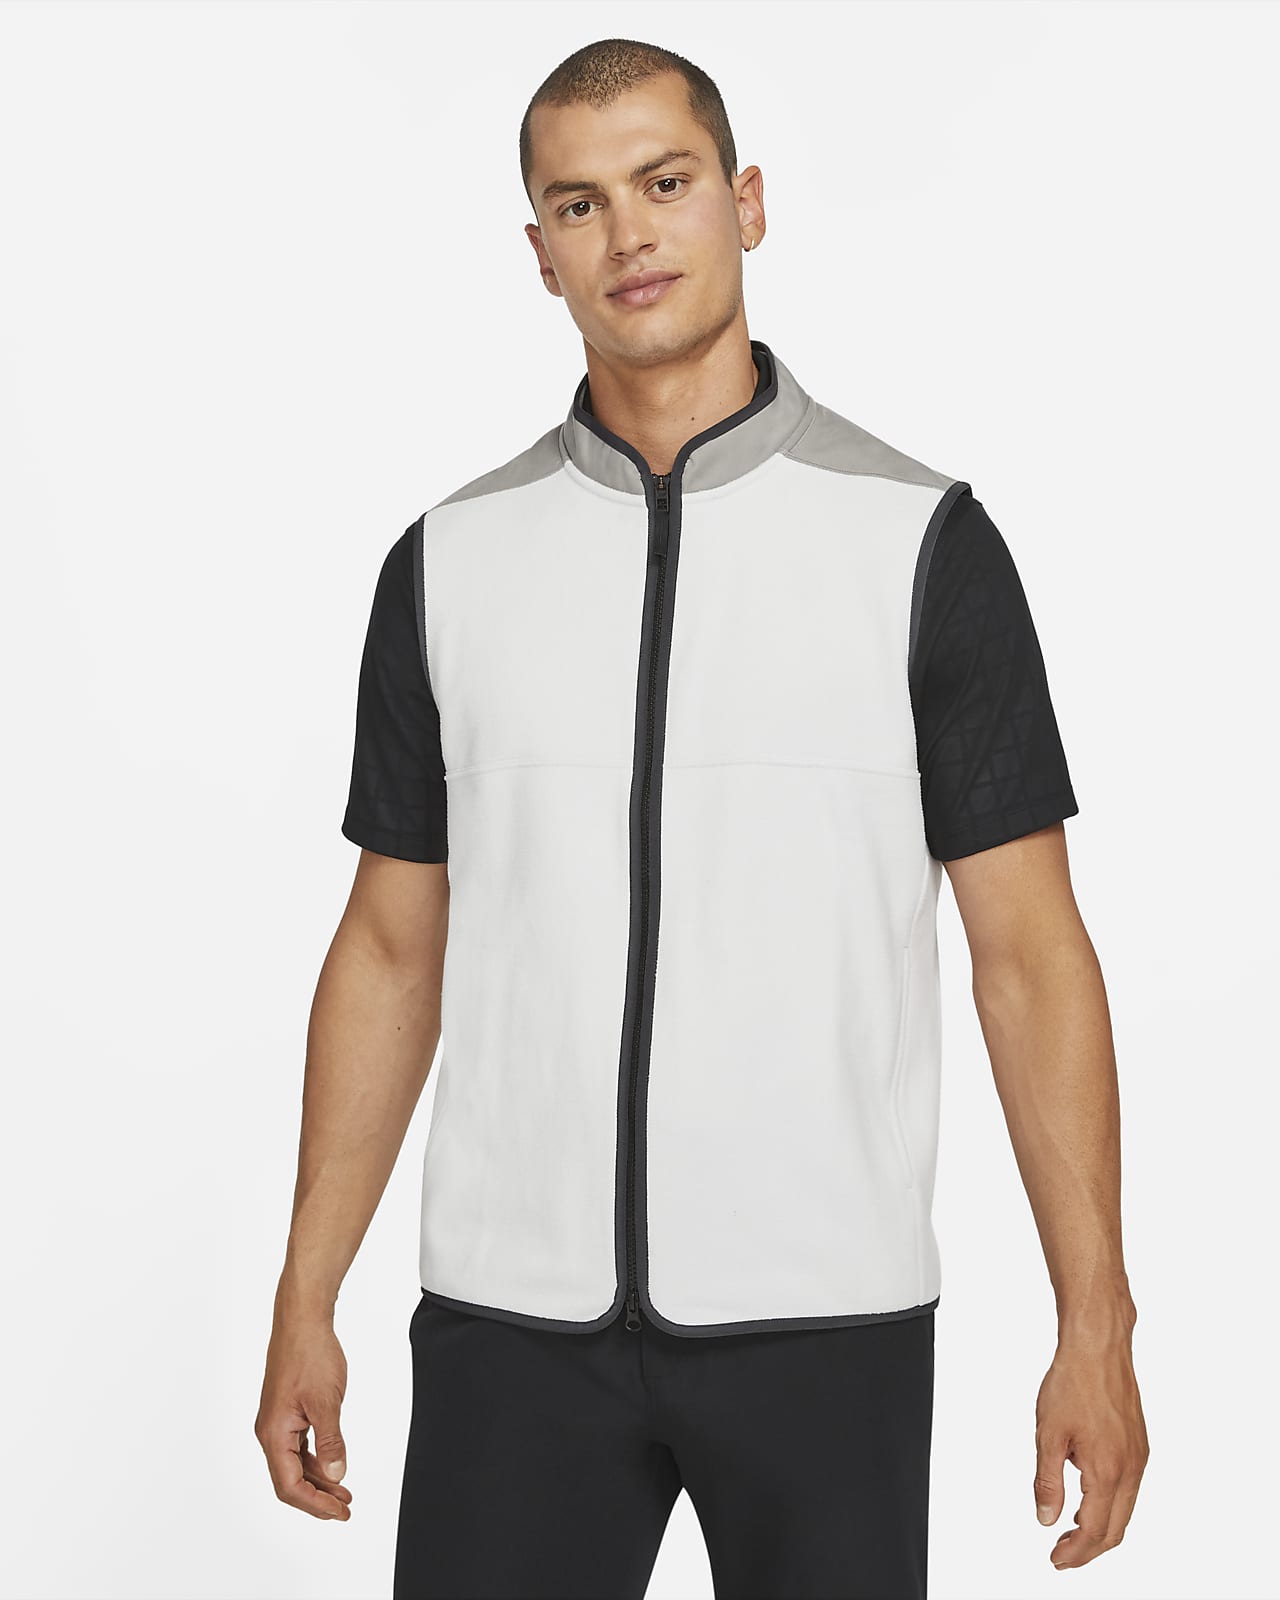 Nike Therma-FIT Victory Men's Golf Gilet